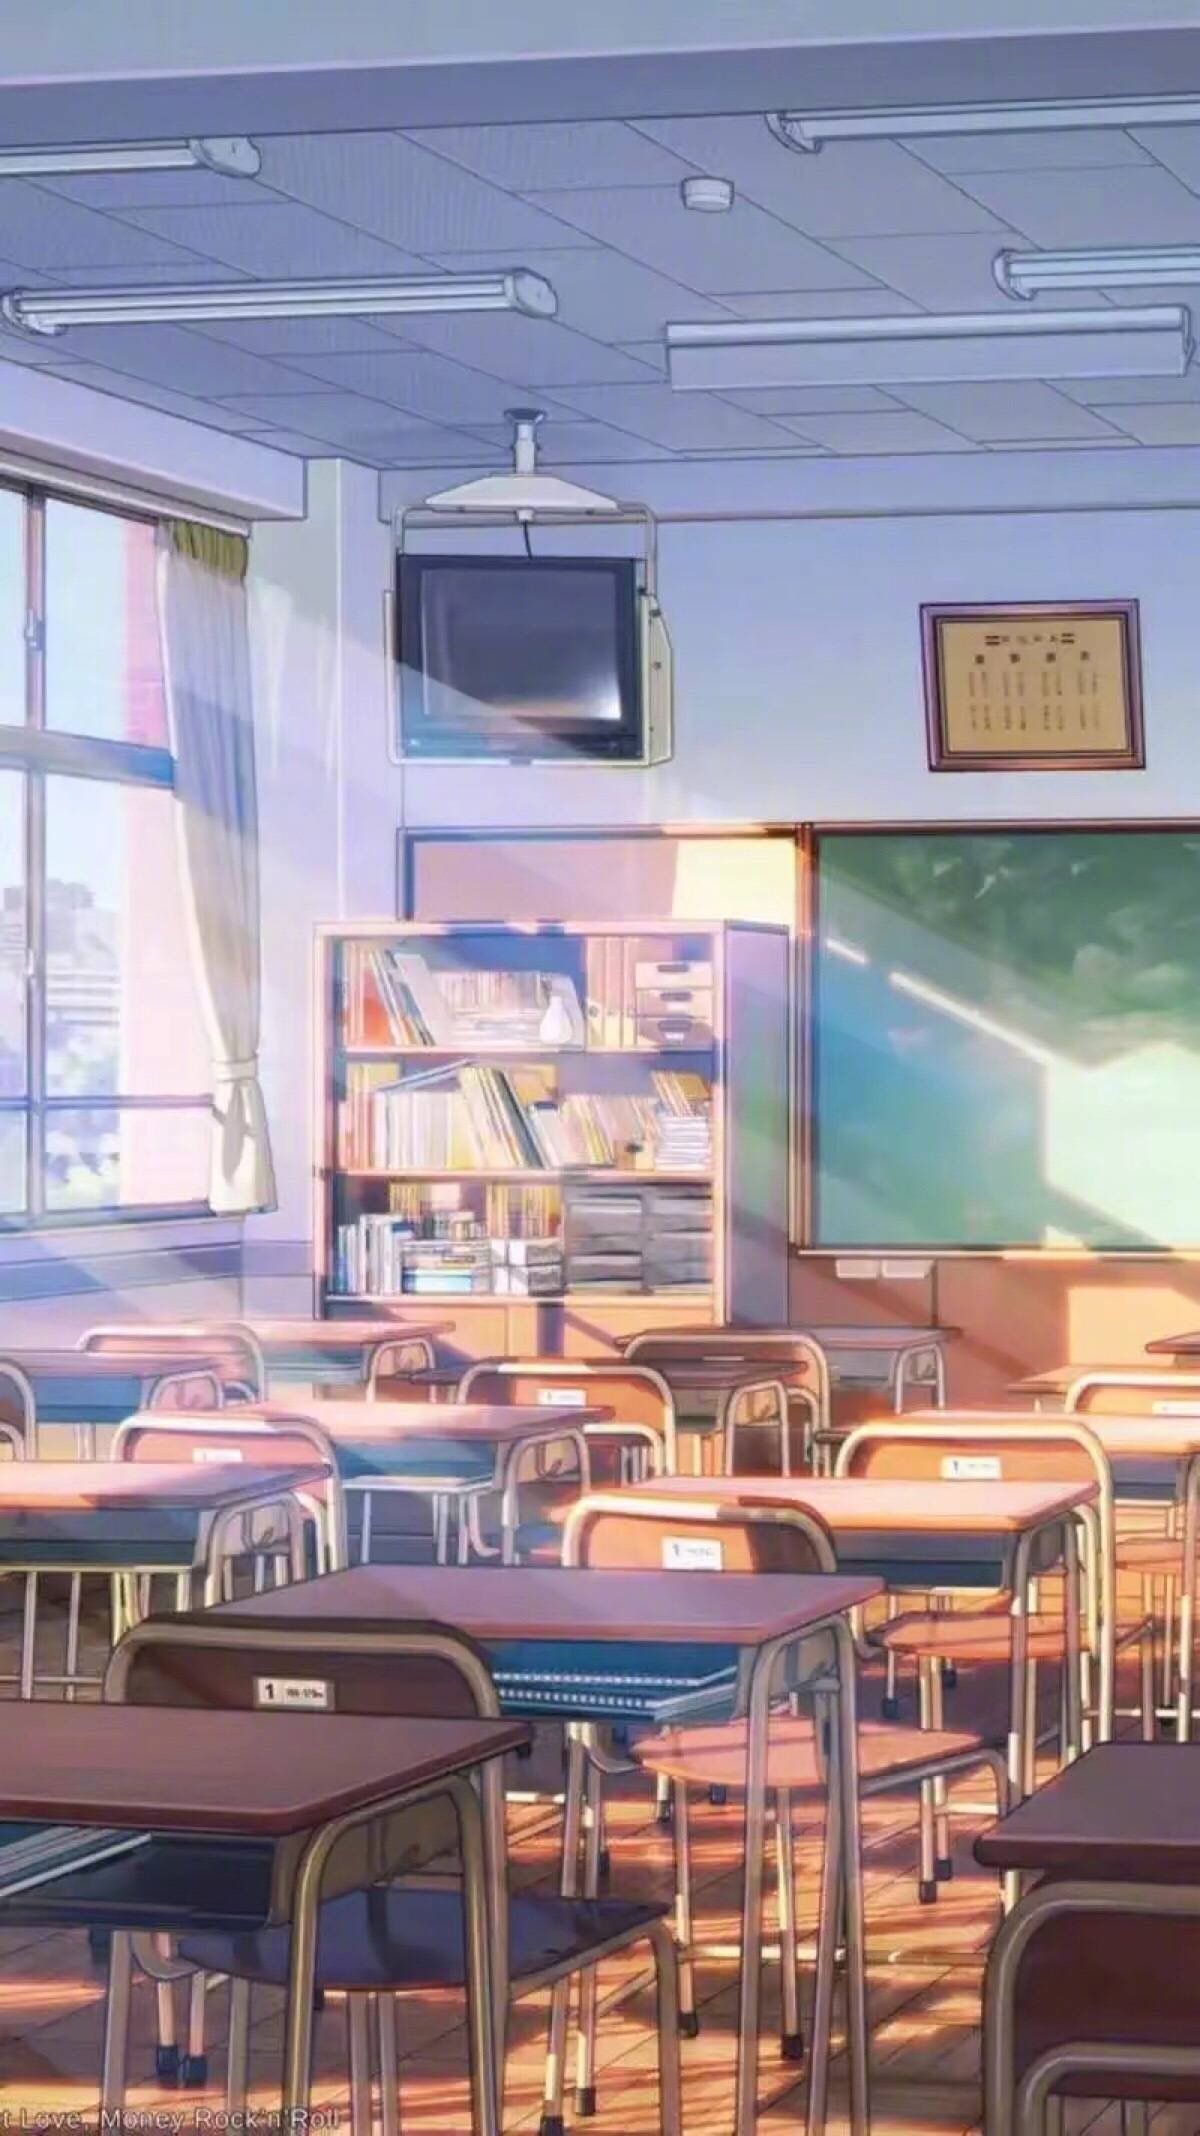 Free Classroom Anime Background - Download in Illustrator, EPS, SVG, JPG,  PNG | Template.net